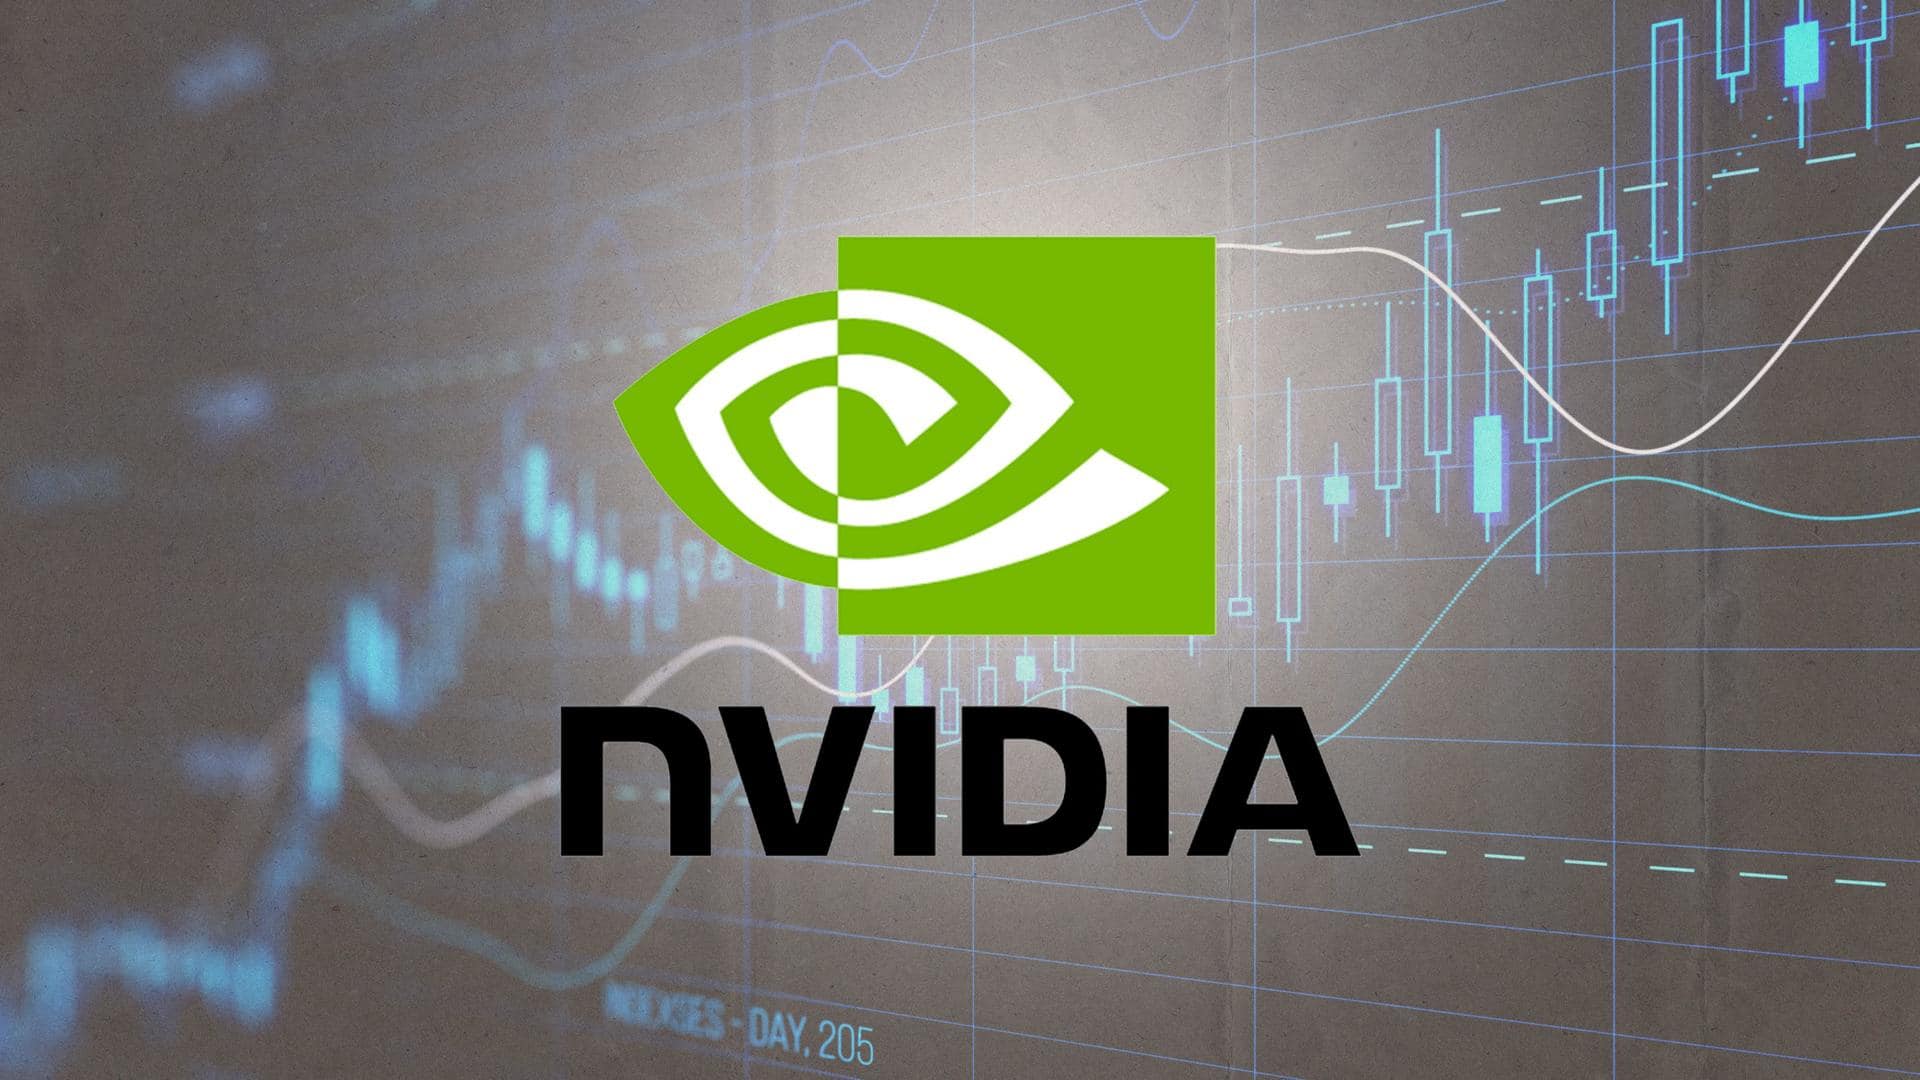 NVIDIA nears $1 trillion valuation: What factors led to this